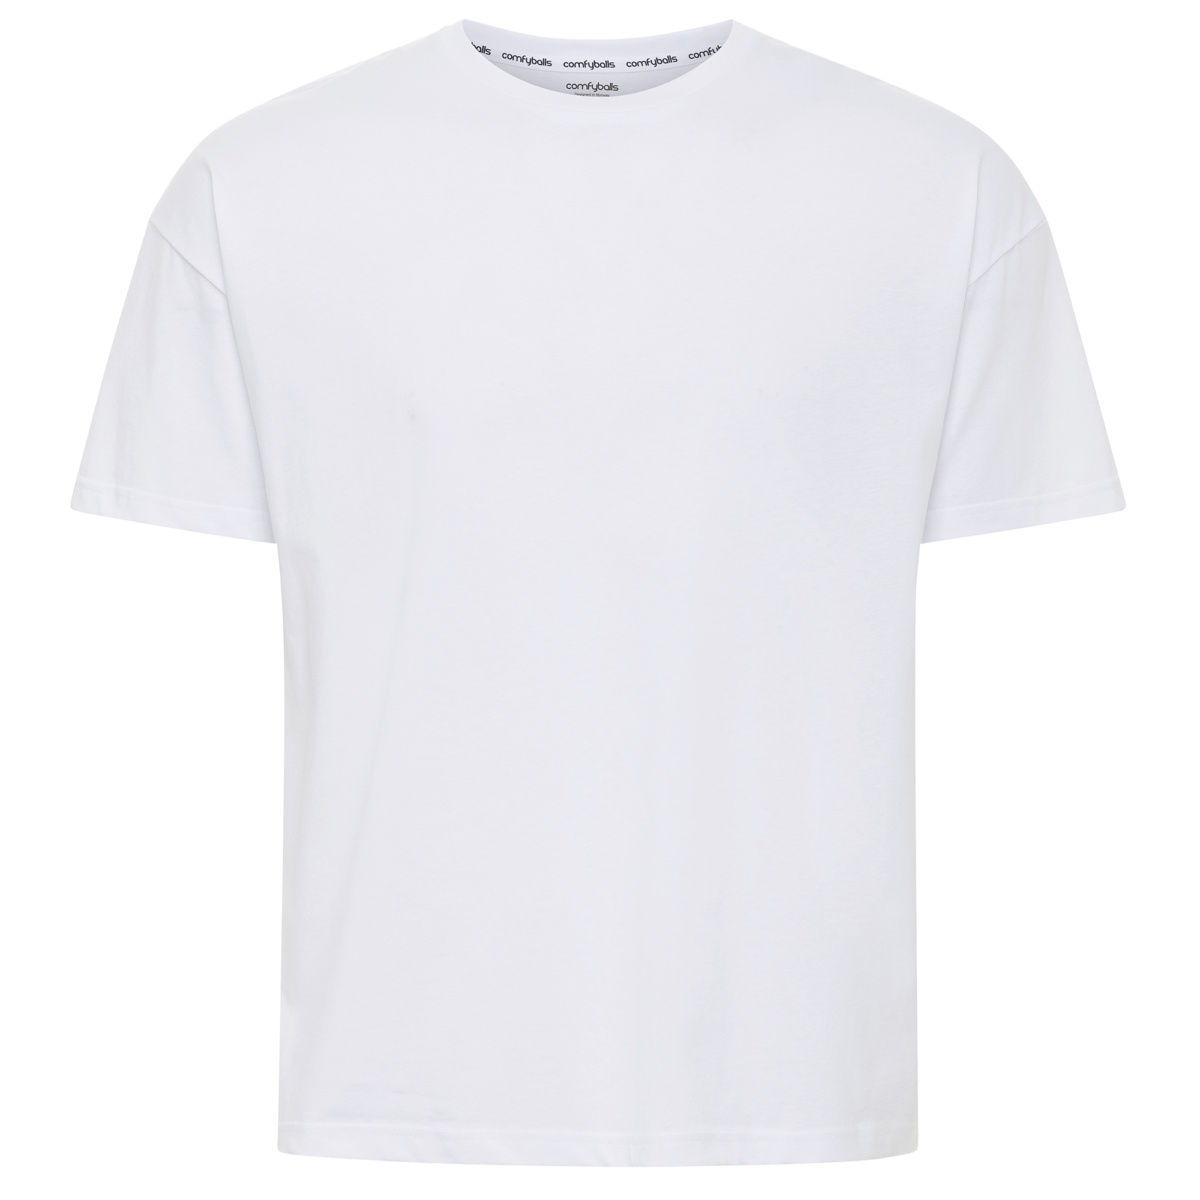 Comfy Oversize Tee White